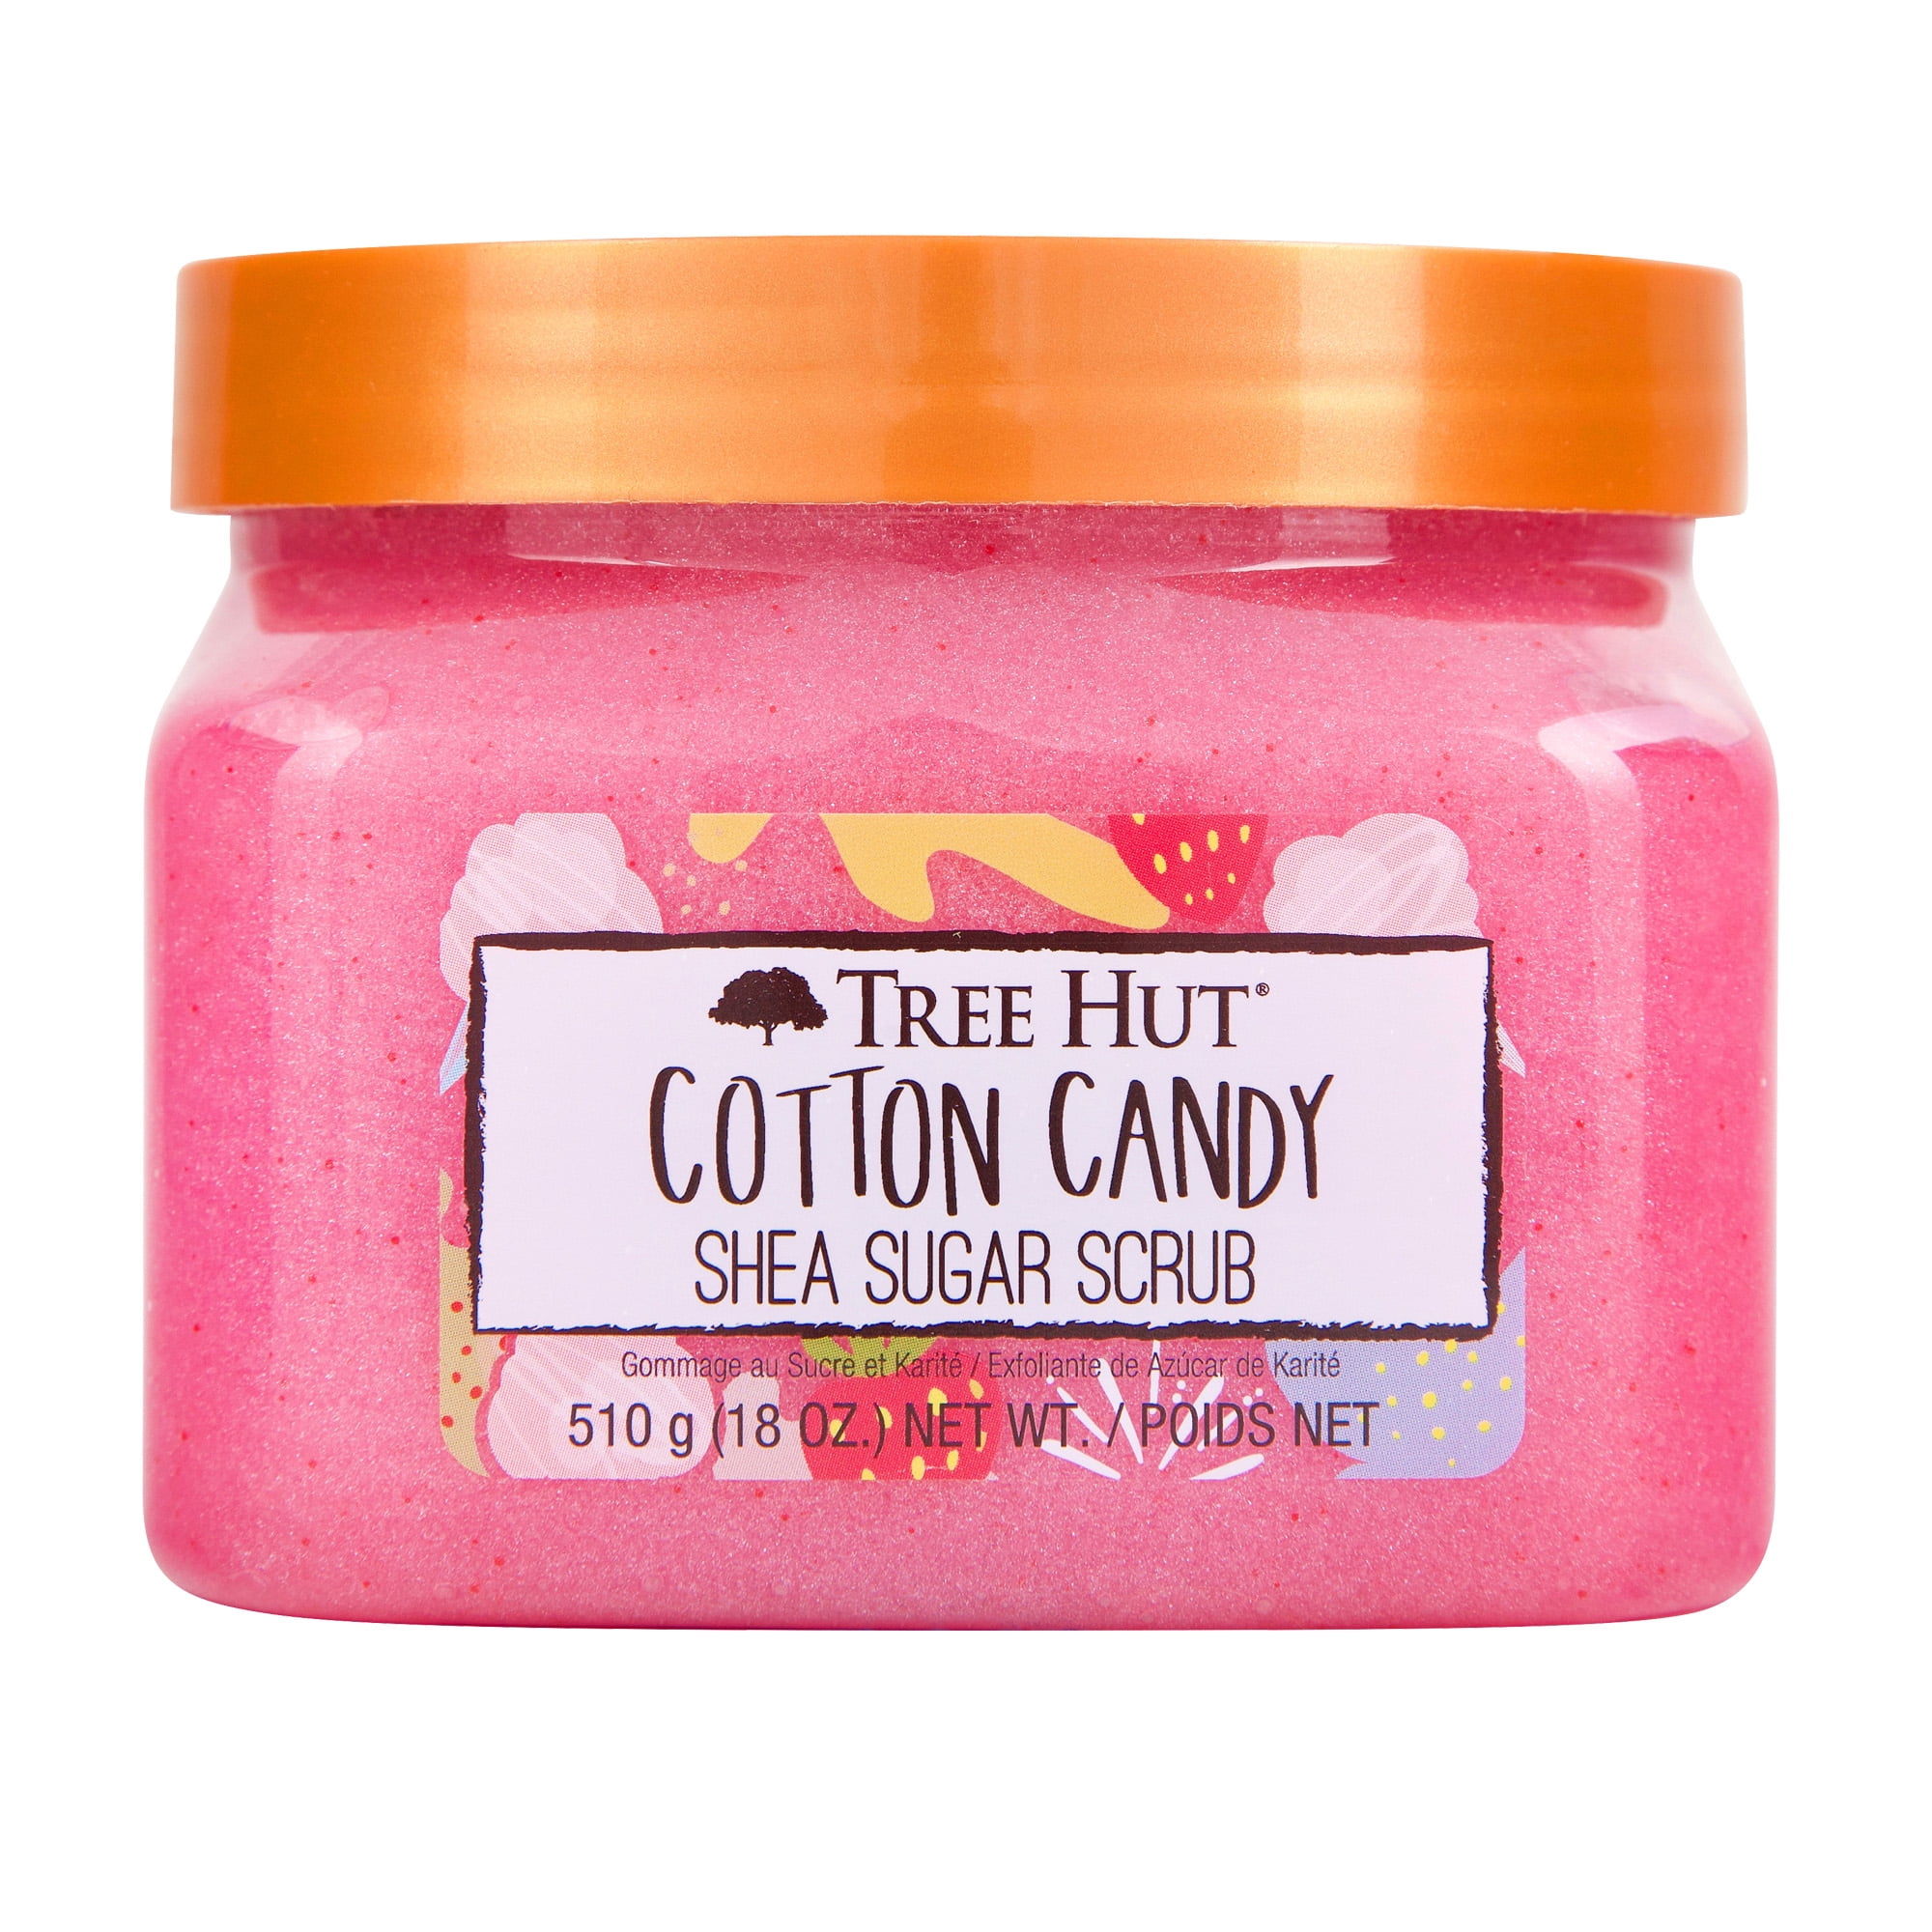 Tree Hut Cotton Candy Shea Sugar Exfoliating and Hydrating Body